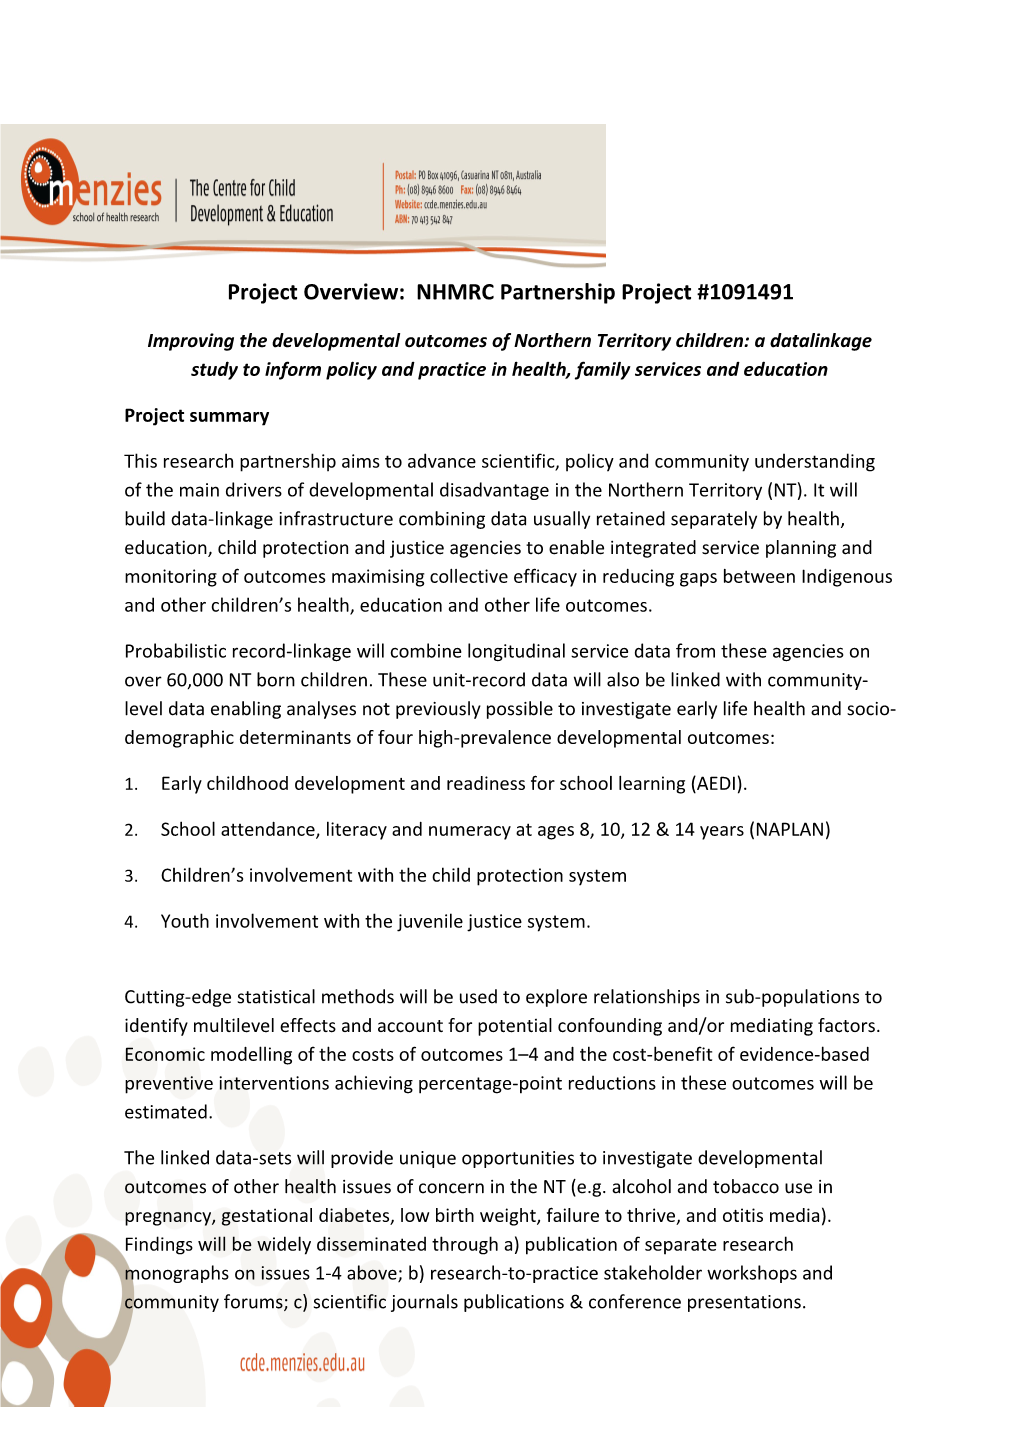 Project Overview: NHMRC Partnership Project #1091491